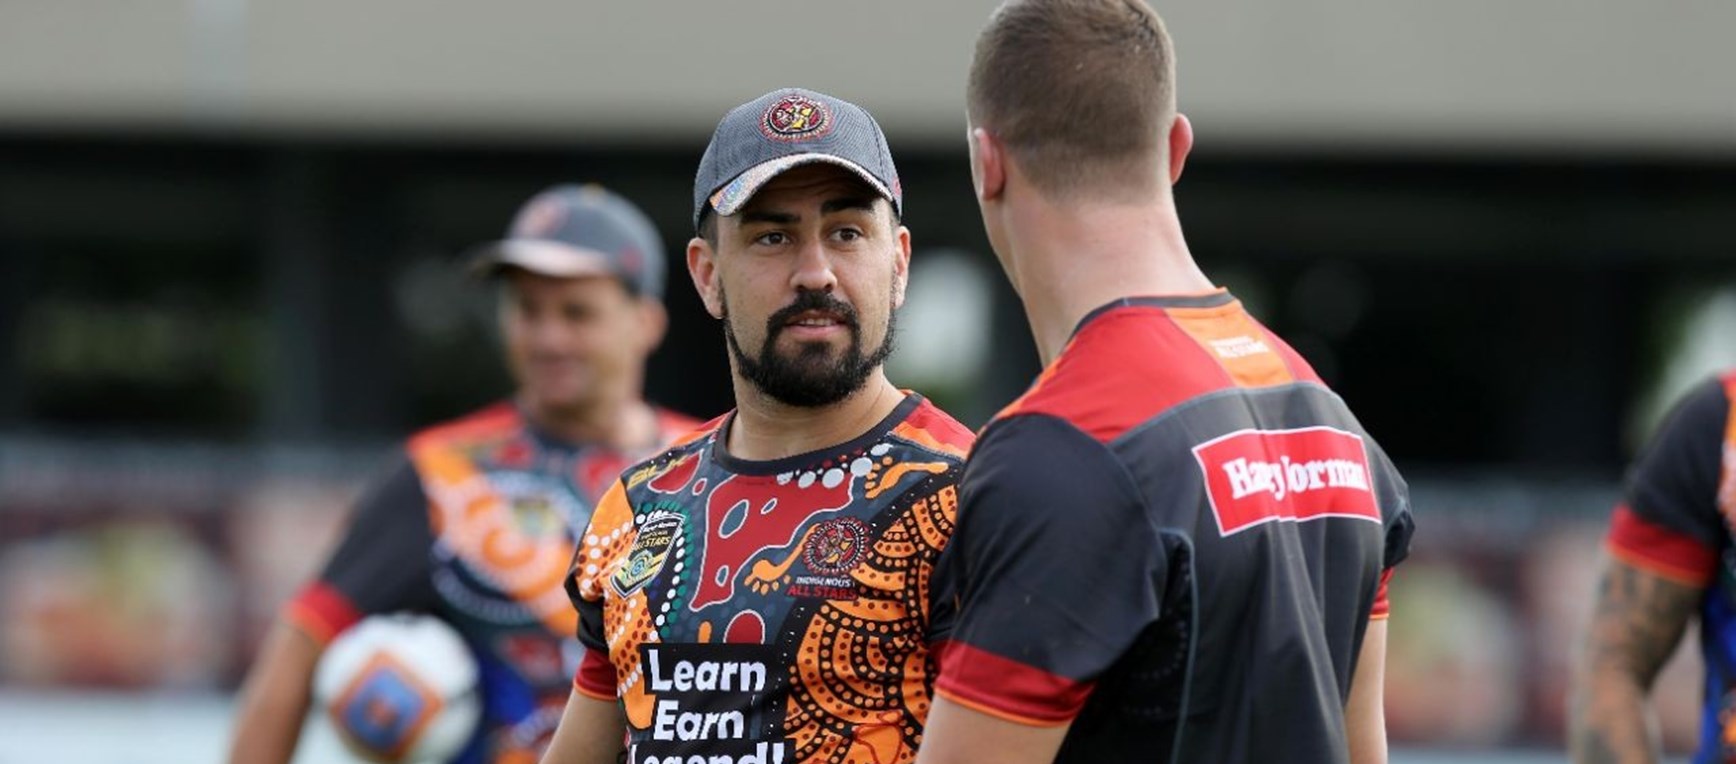 Gallery: Panthers in the All Stars